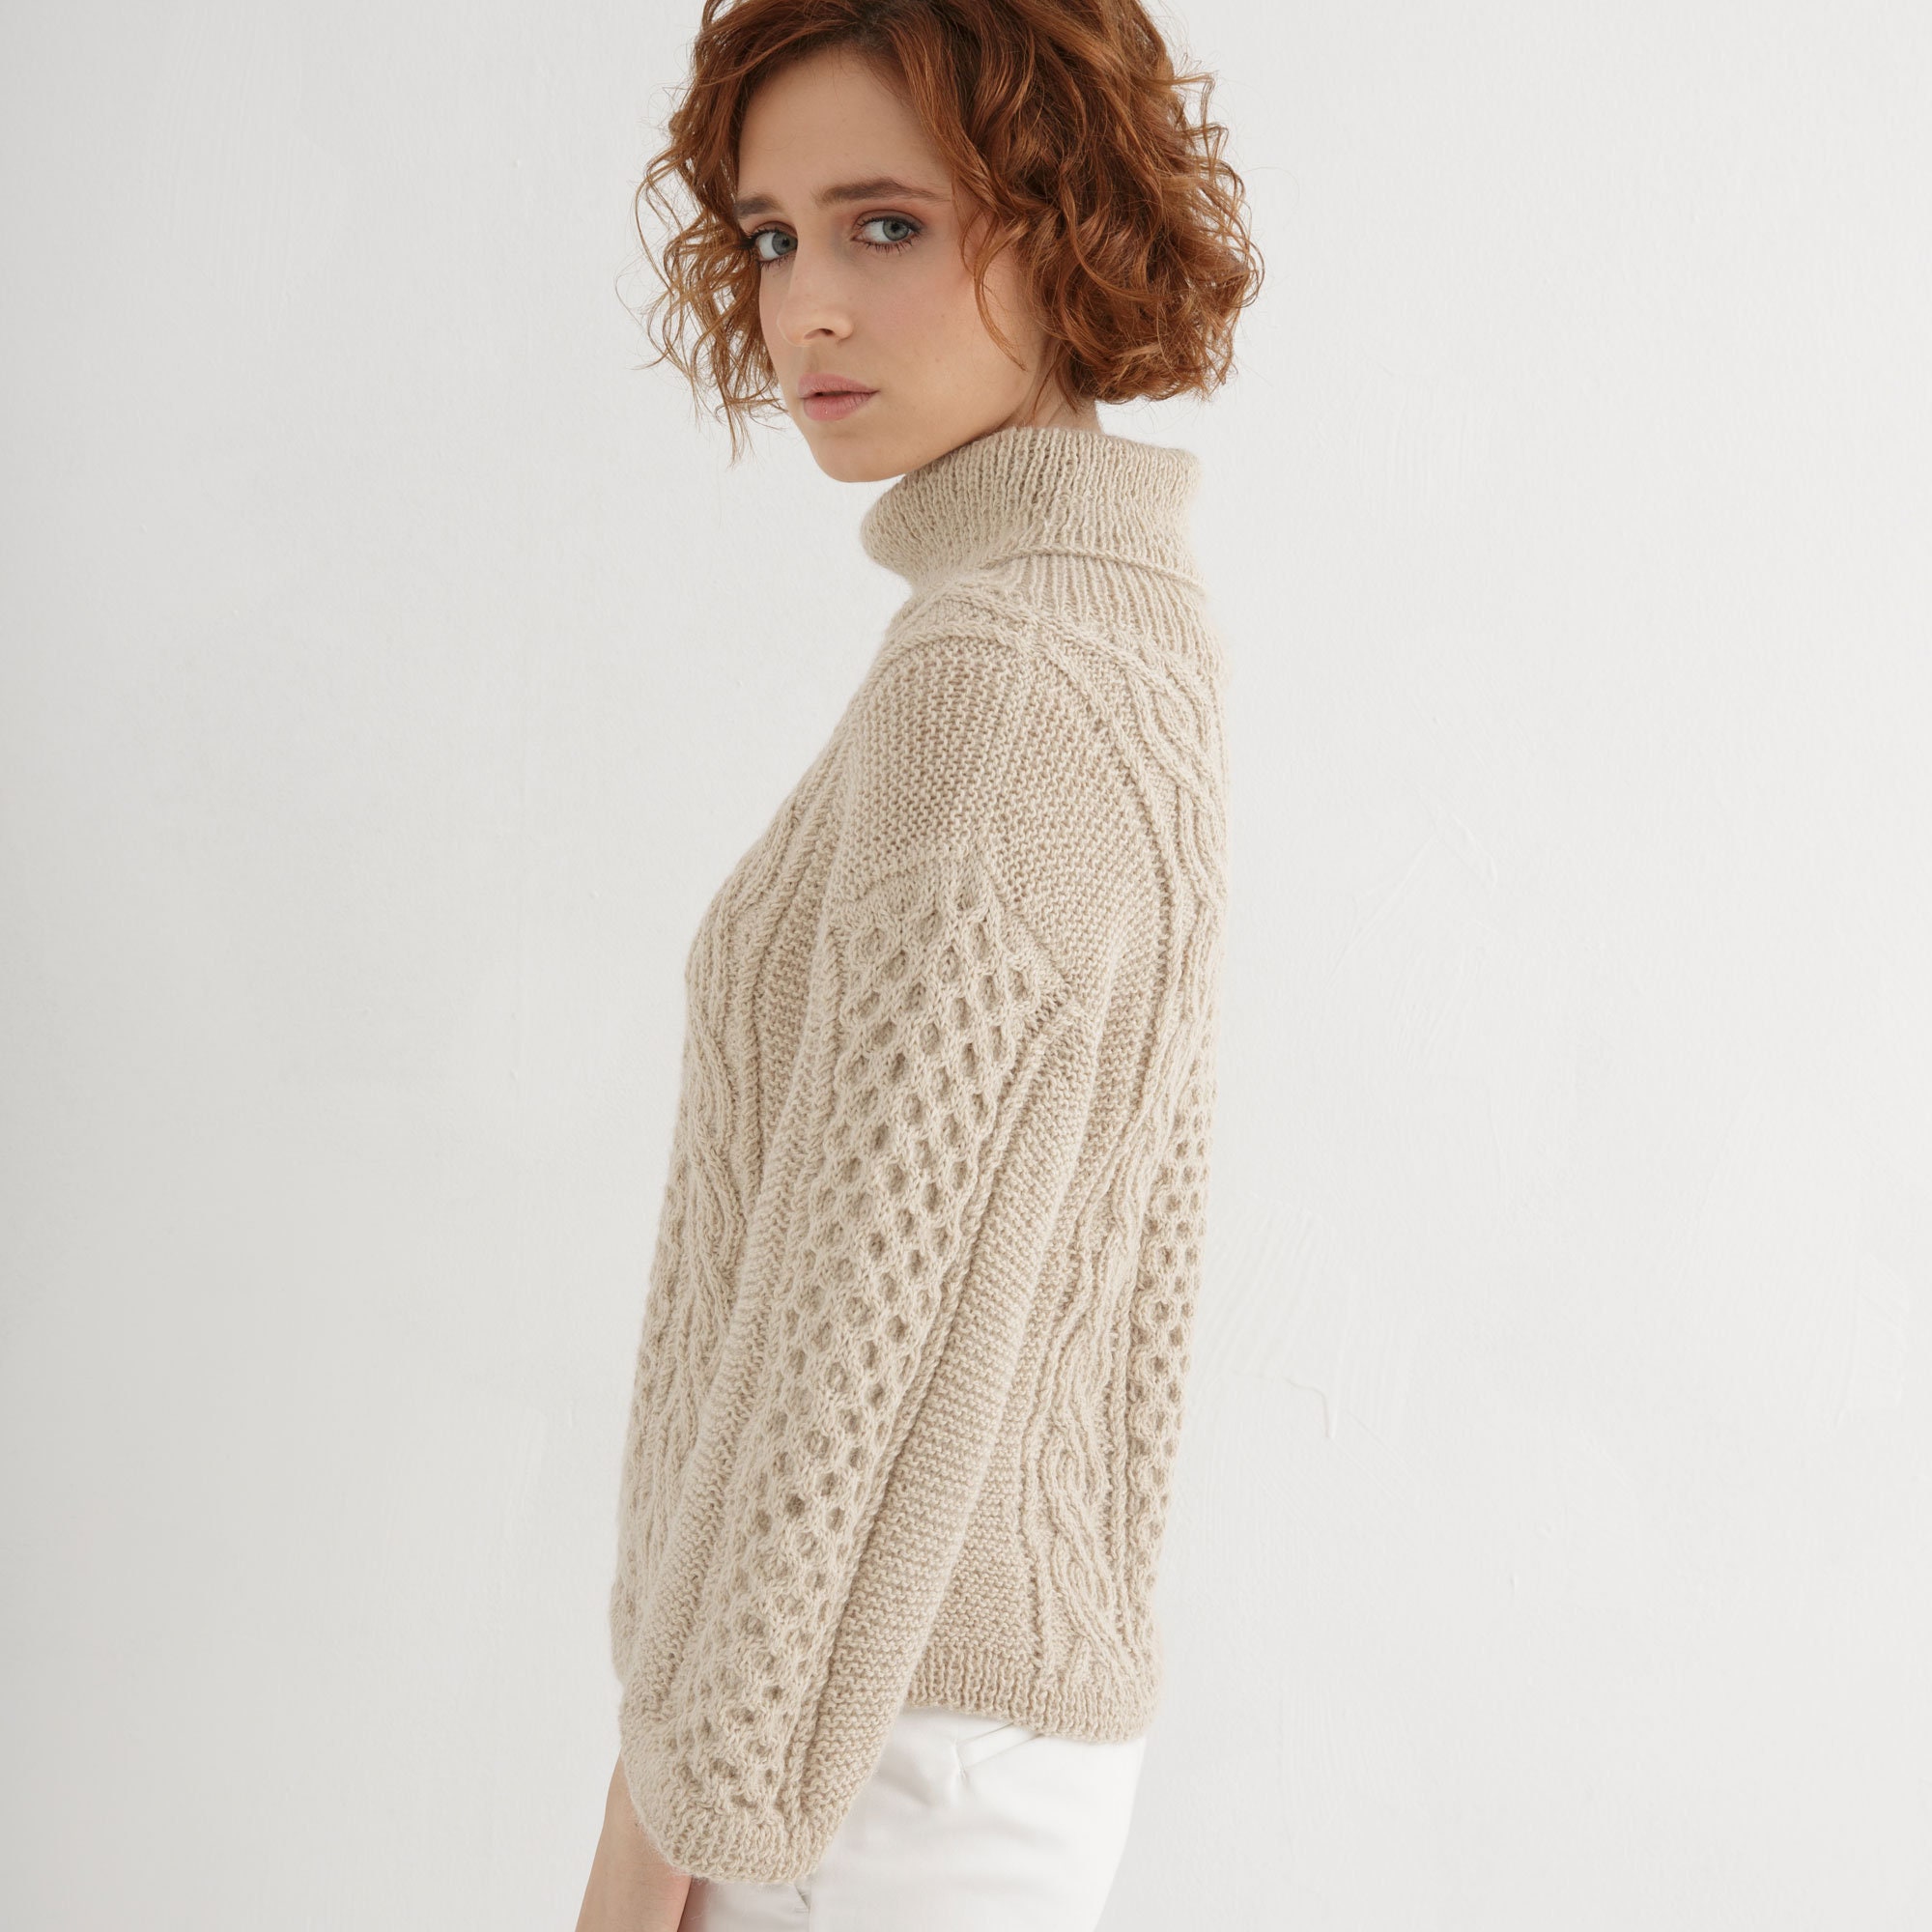 Cable Knit Sweater Pattern Turtleneck Sweater for Women - Etsy